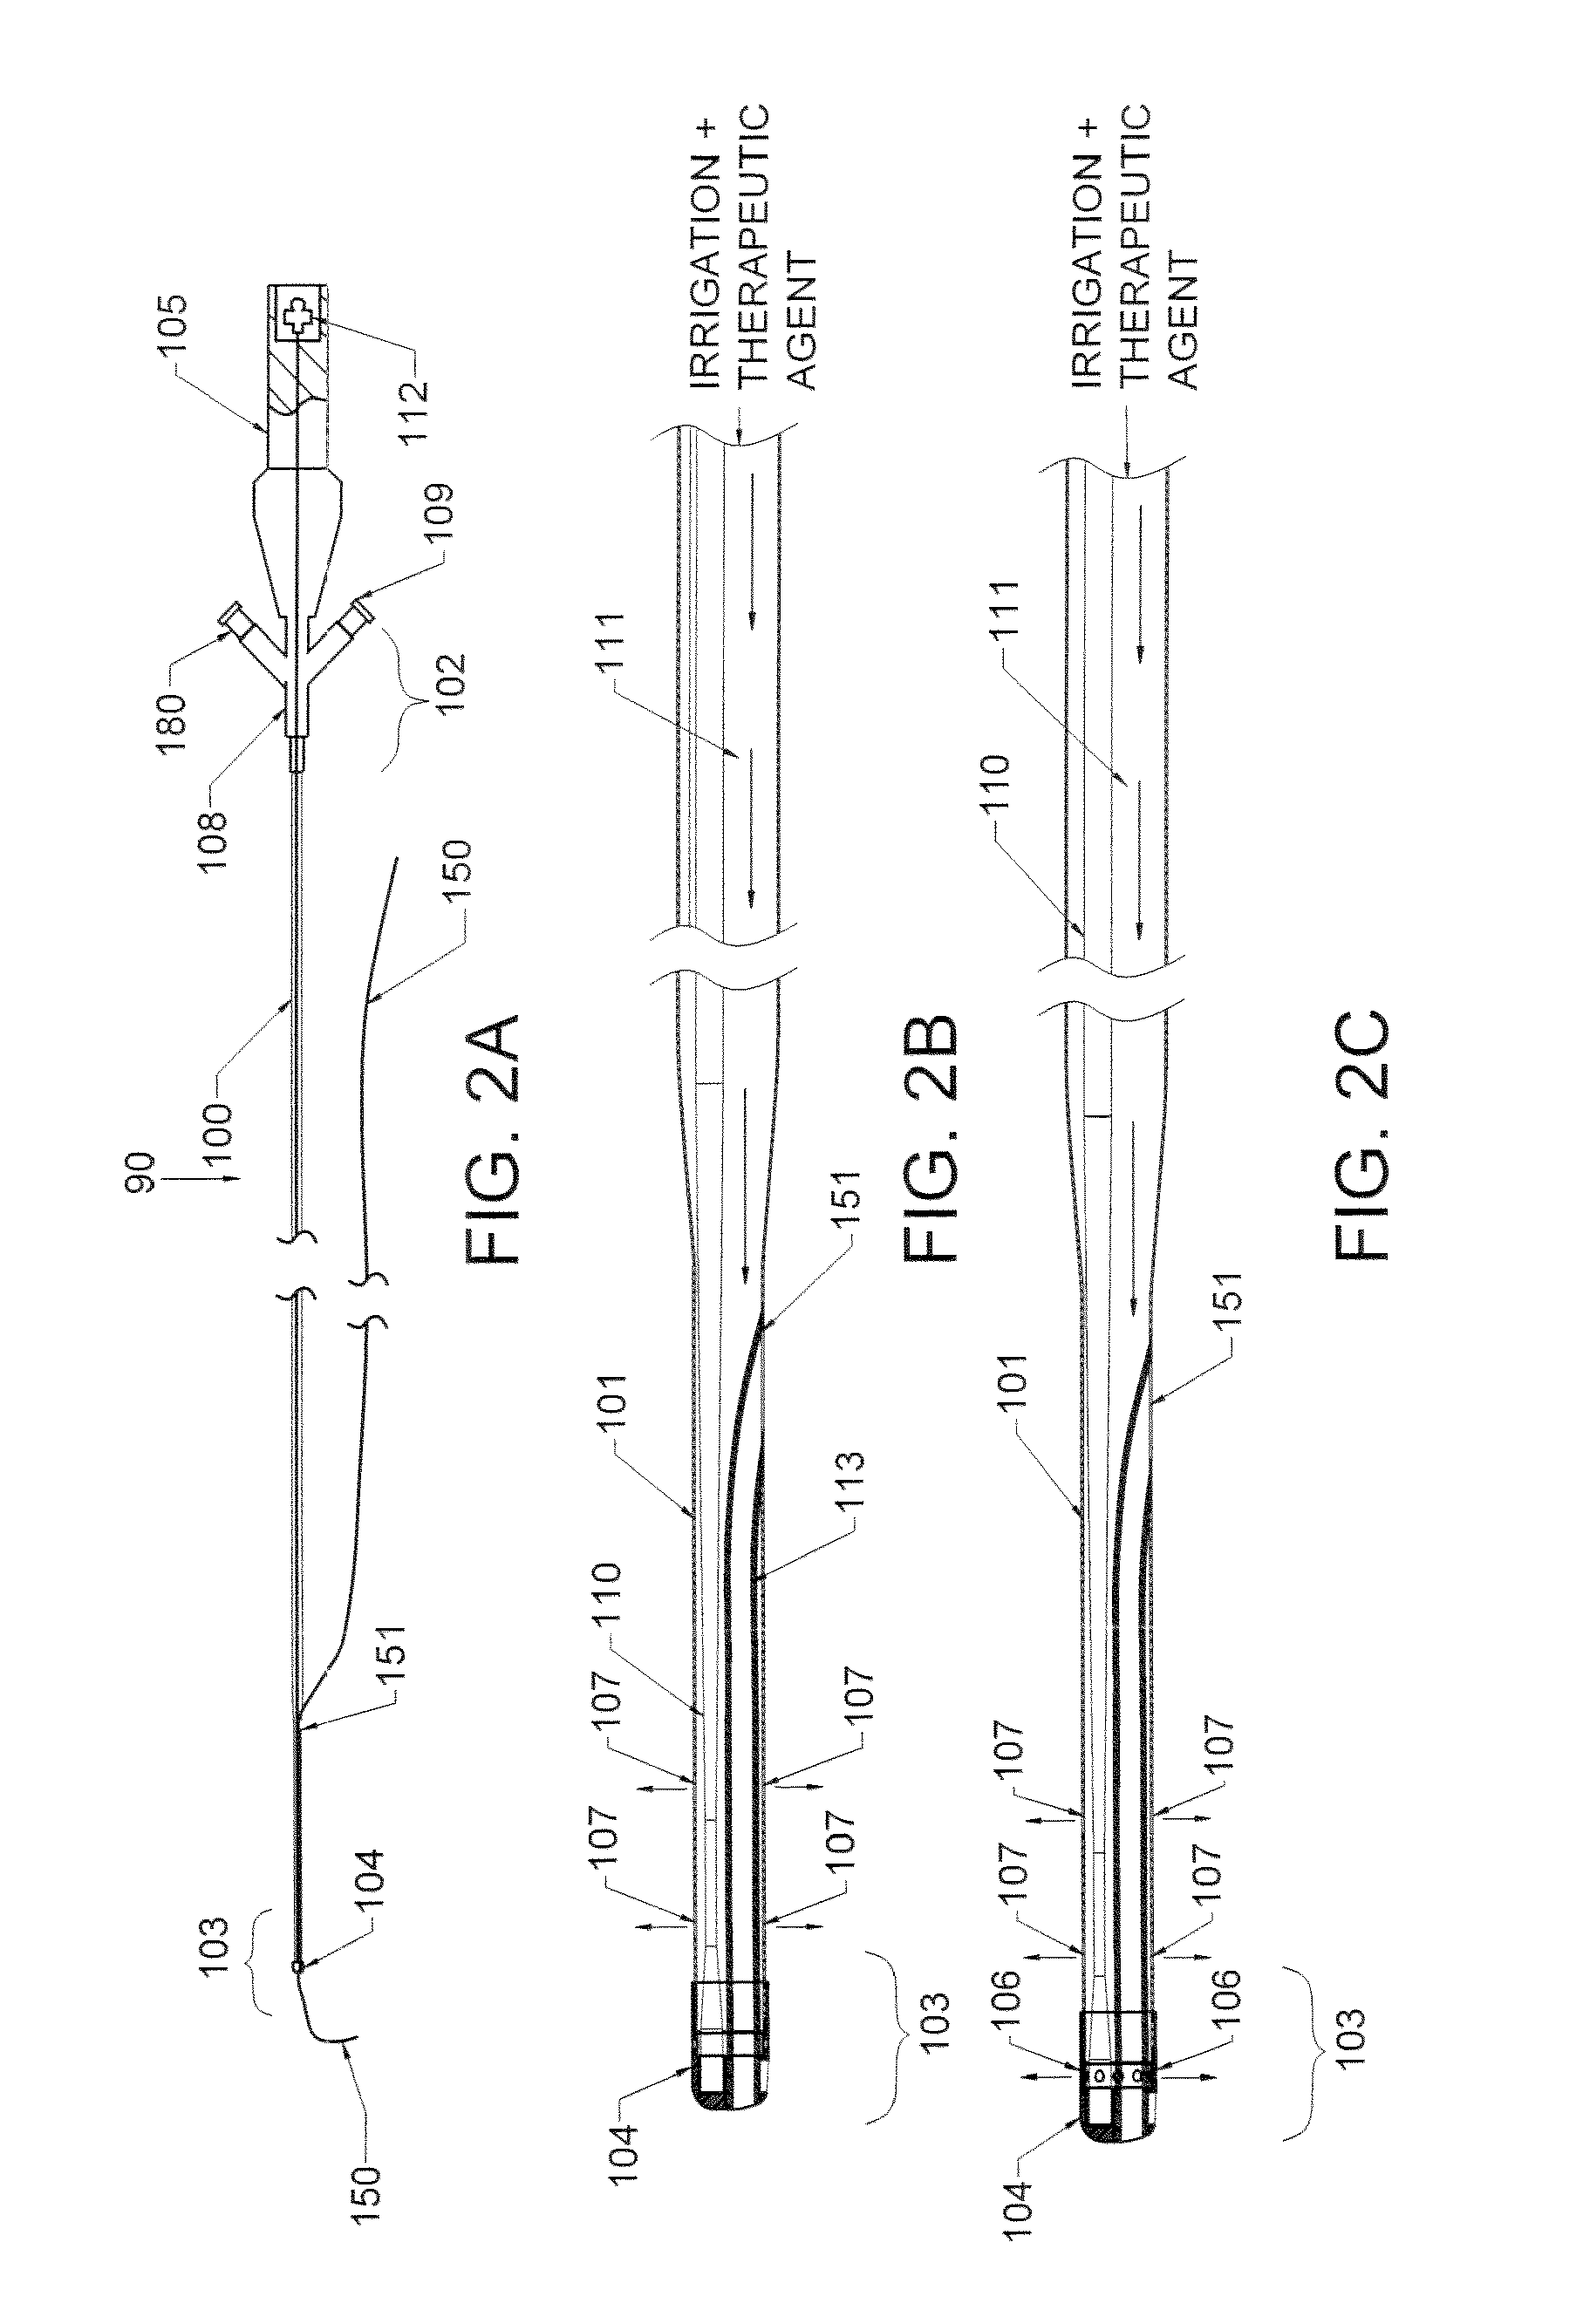 Methods and devices for endovascular therapy